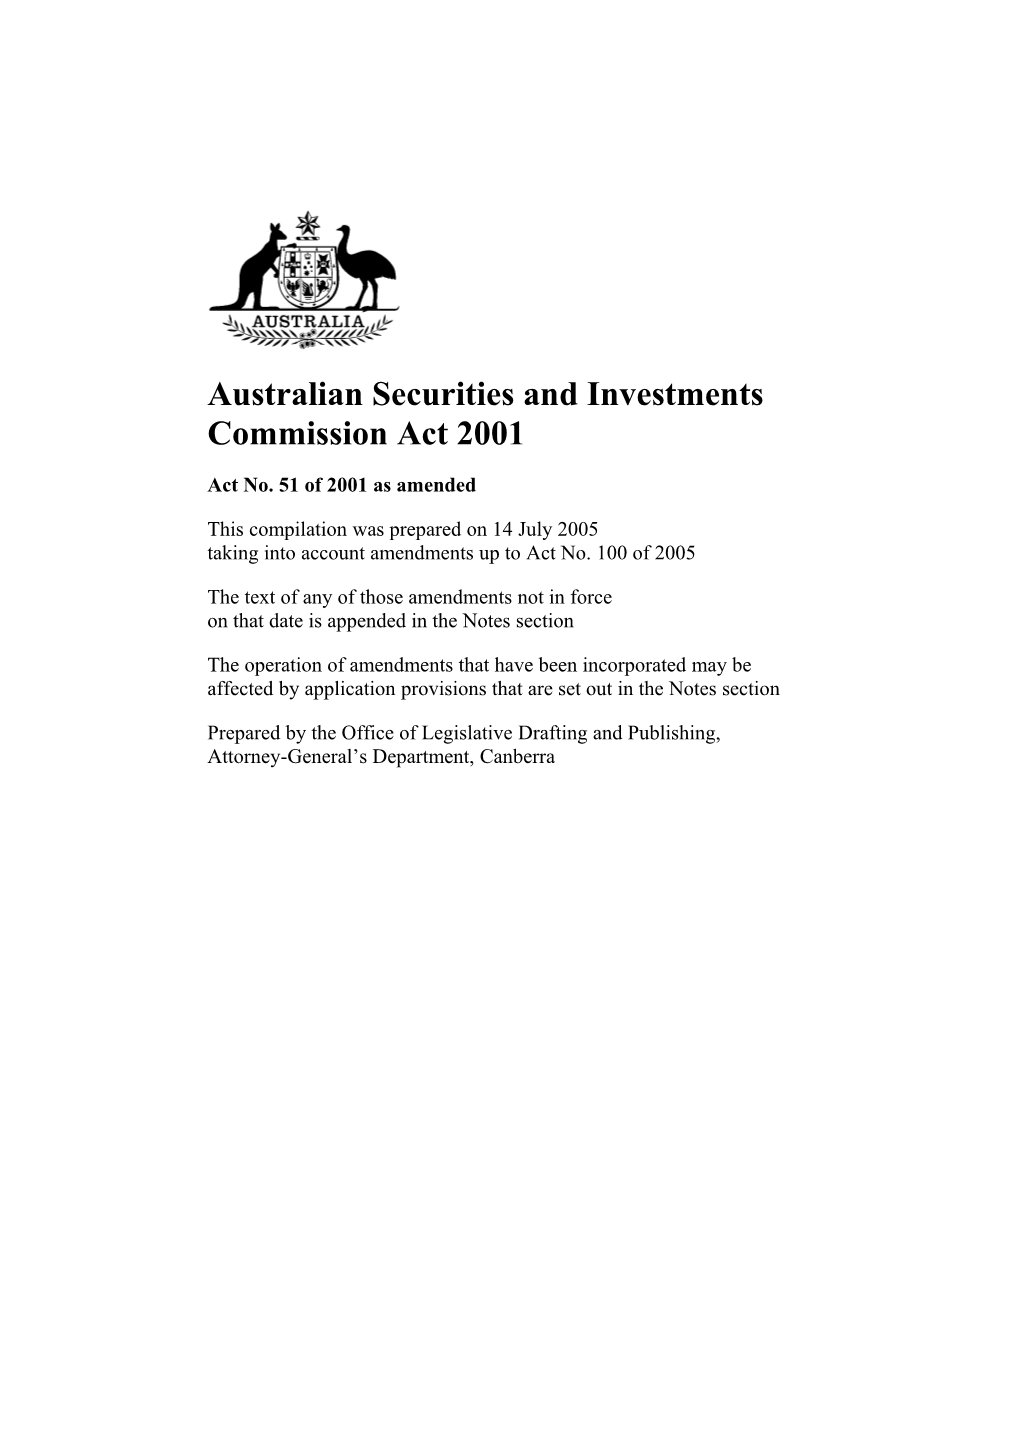 Australian Securities and Investments Commission Act 2001